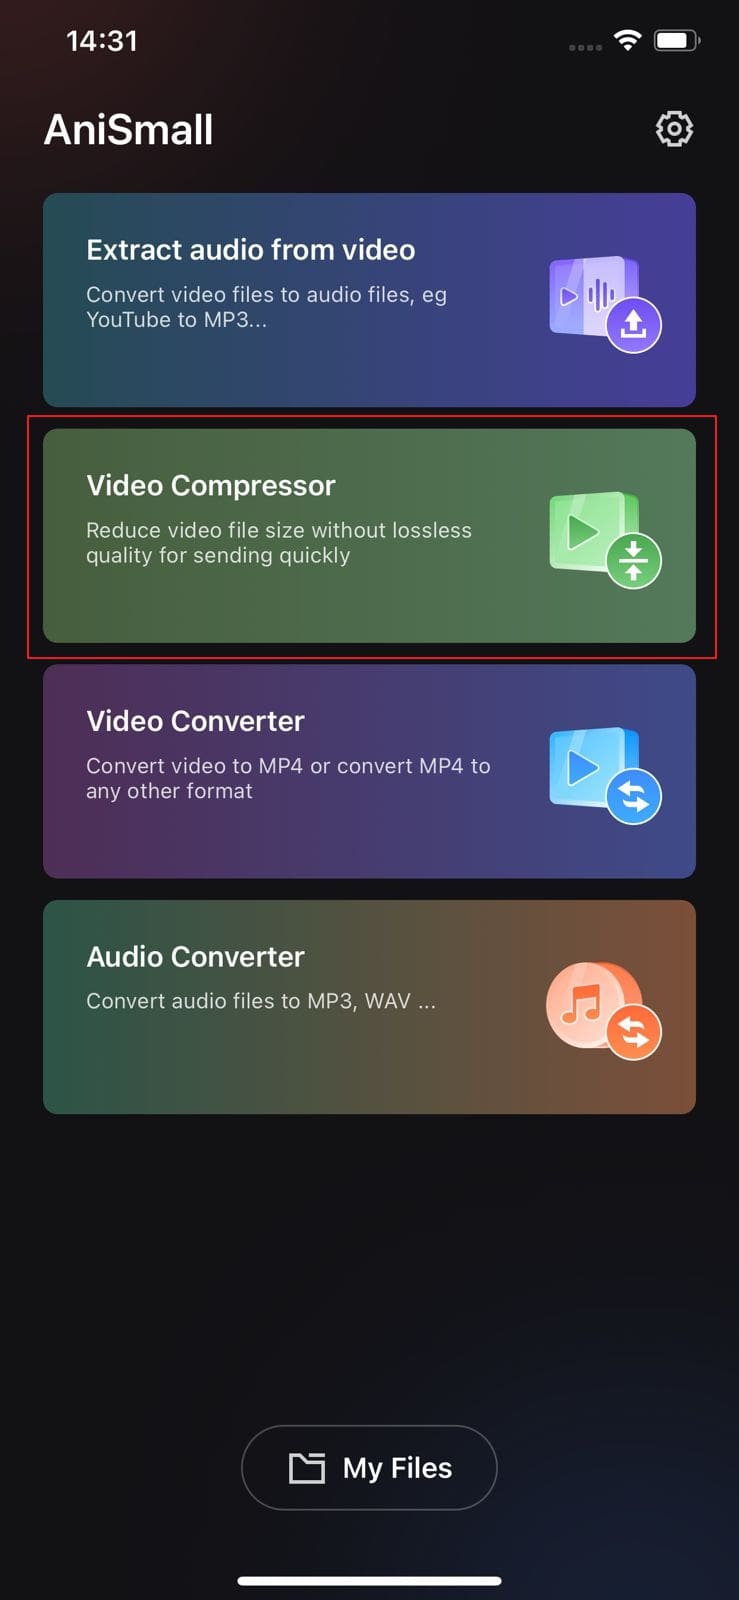 proceed with video compressor